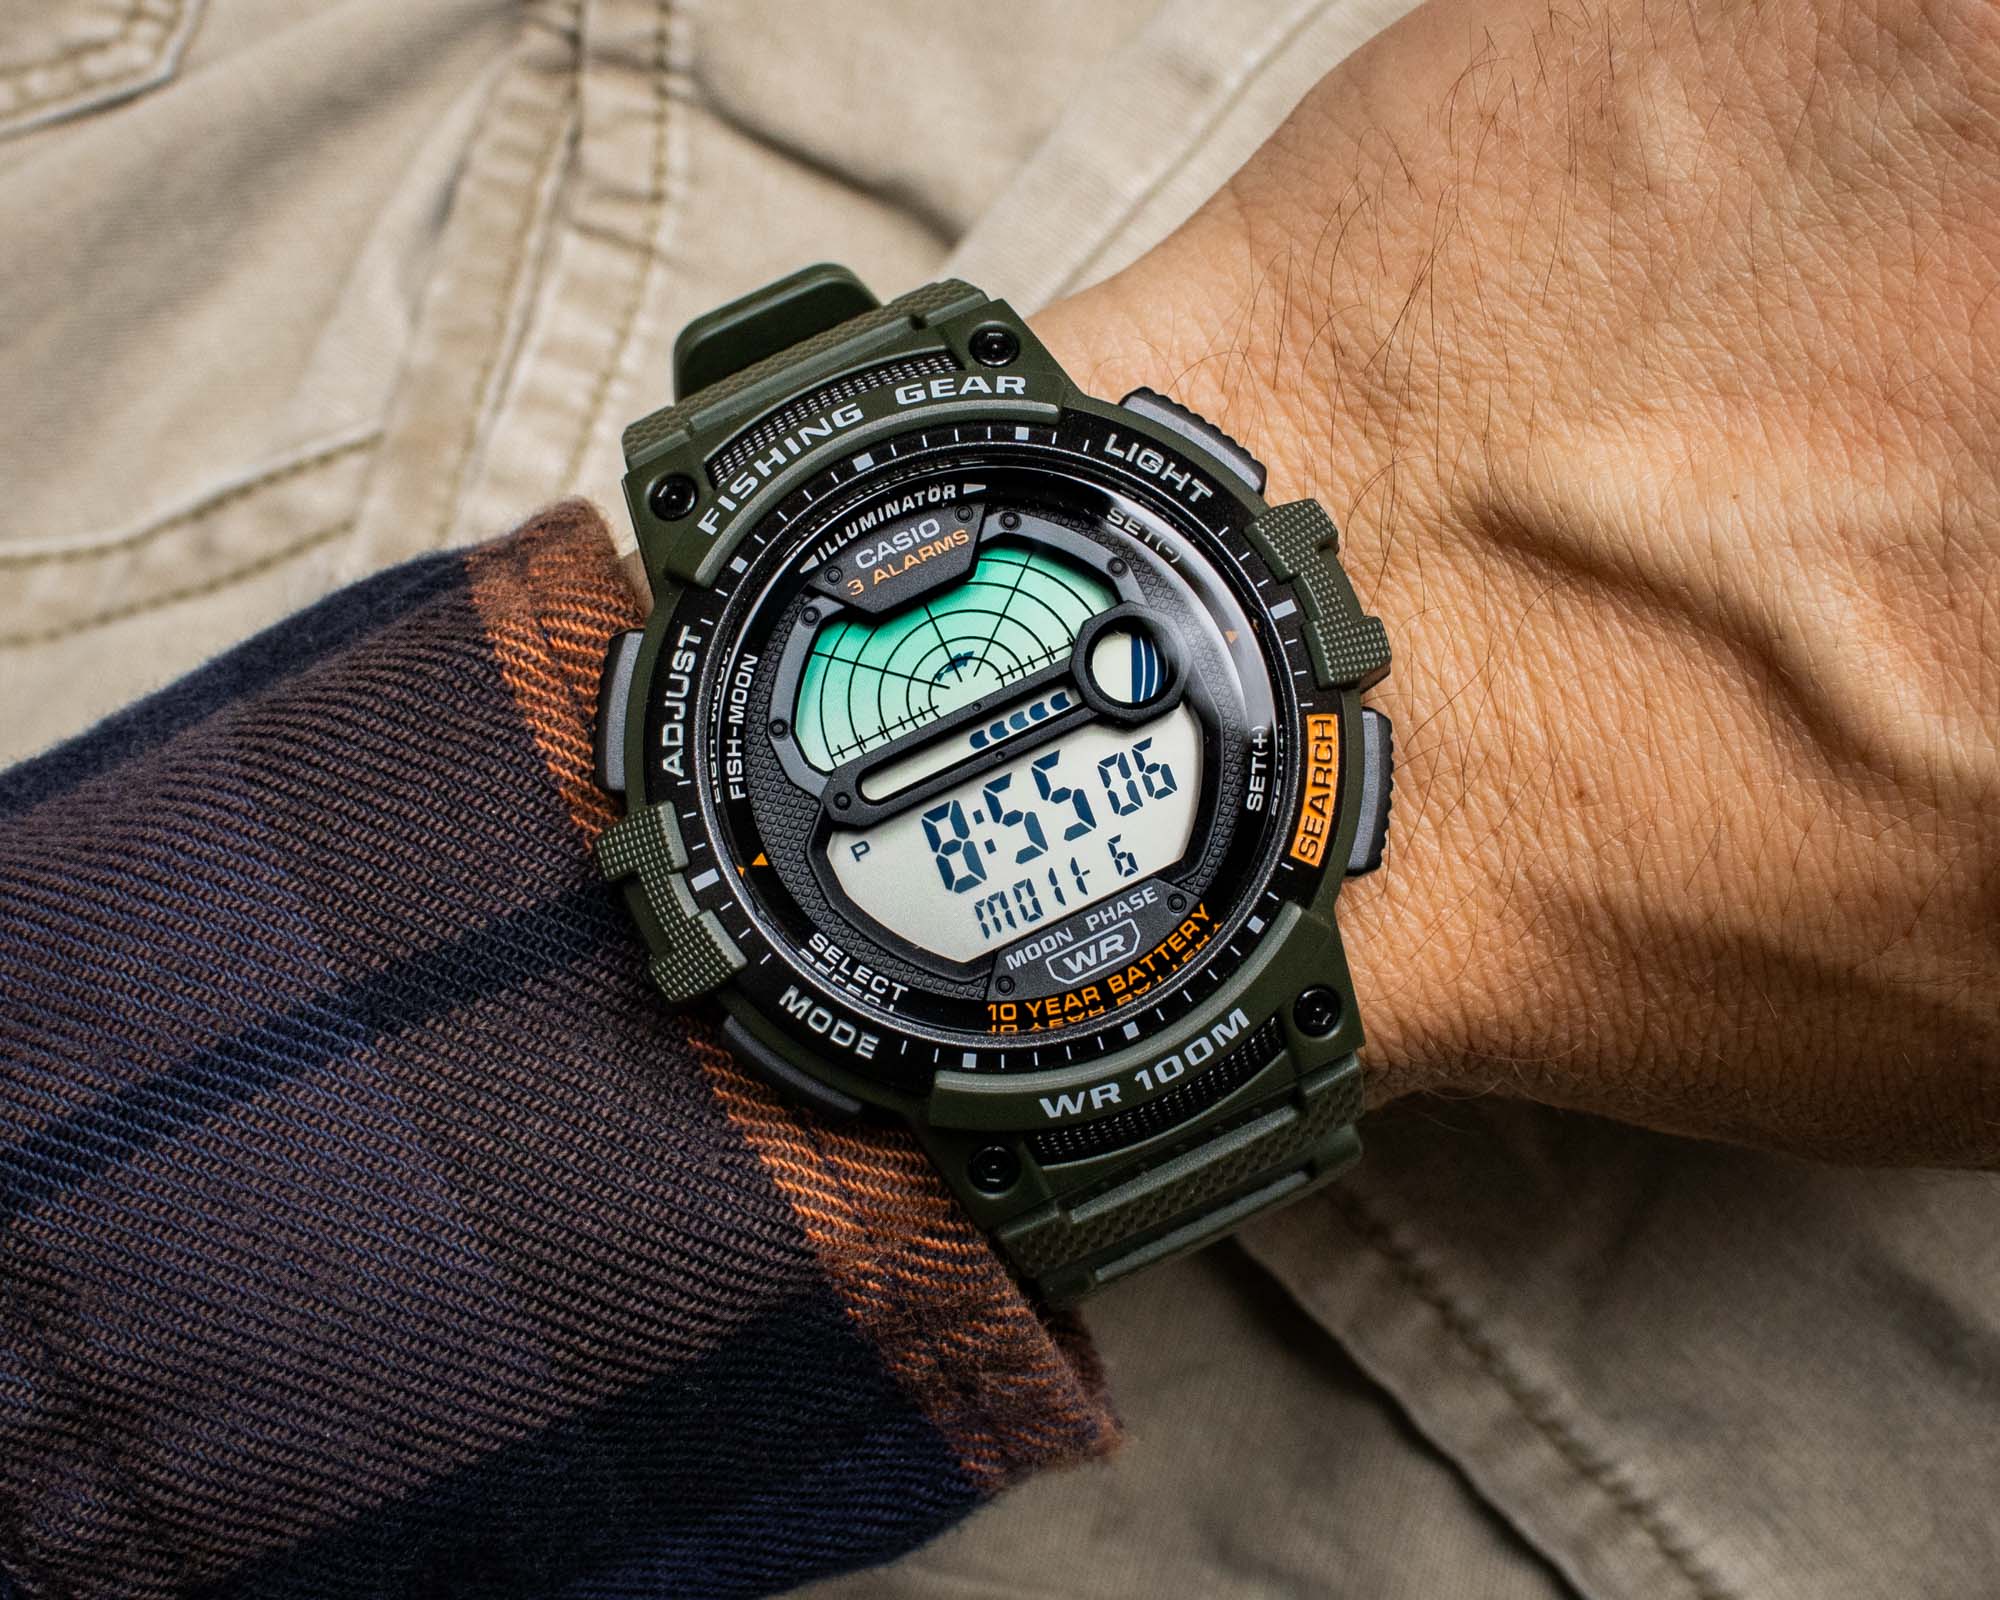 Casio Fishing Gear Review (WS-1200h) - So Many Functions for $21! 